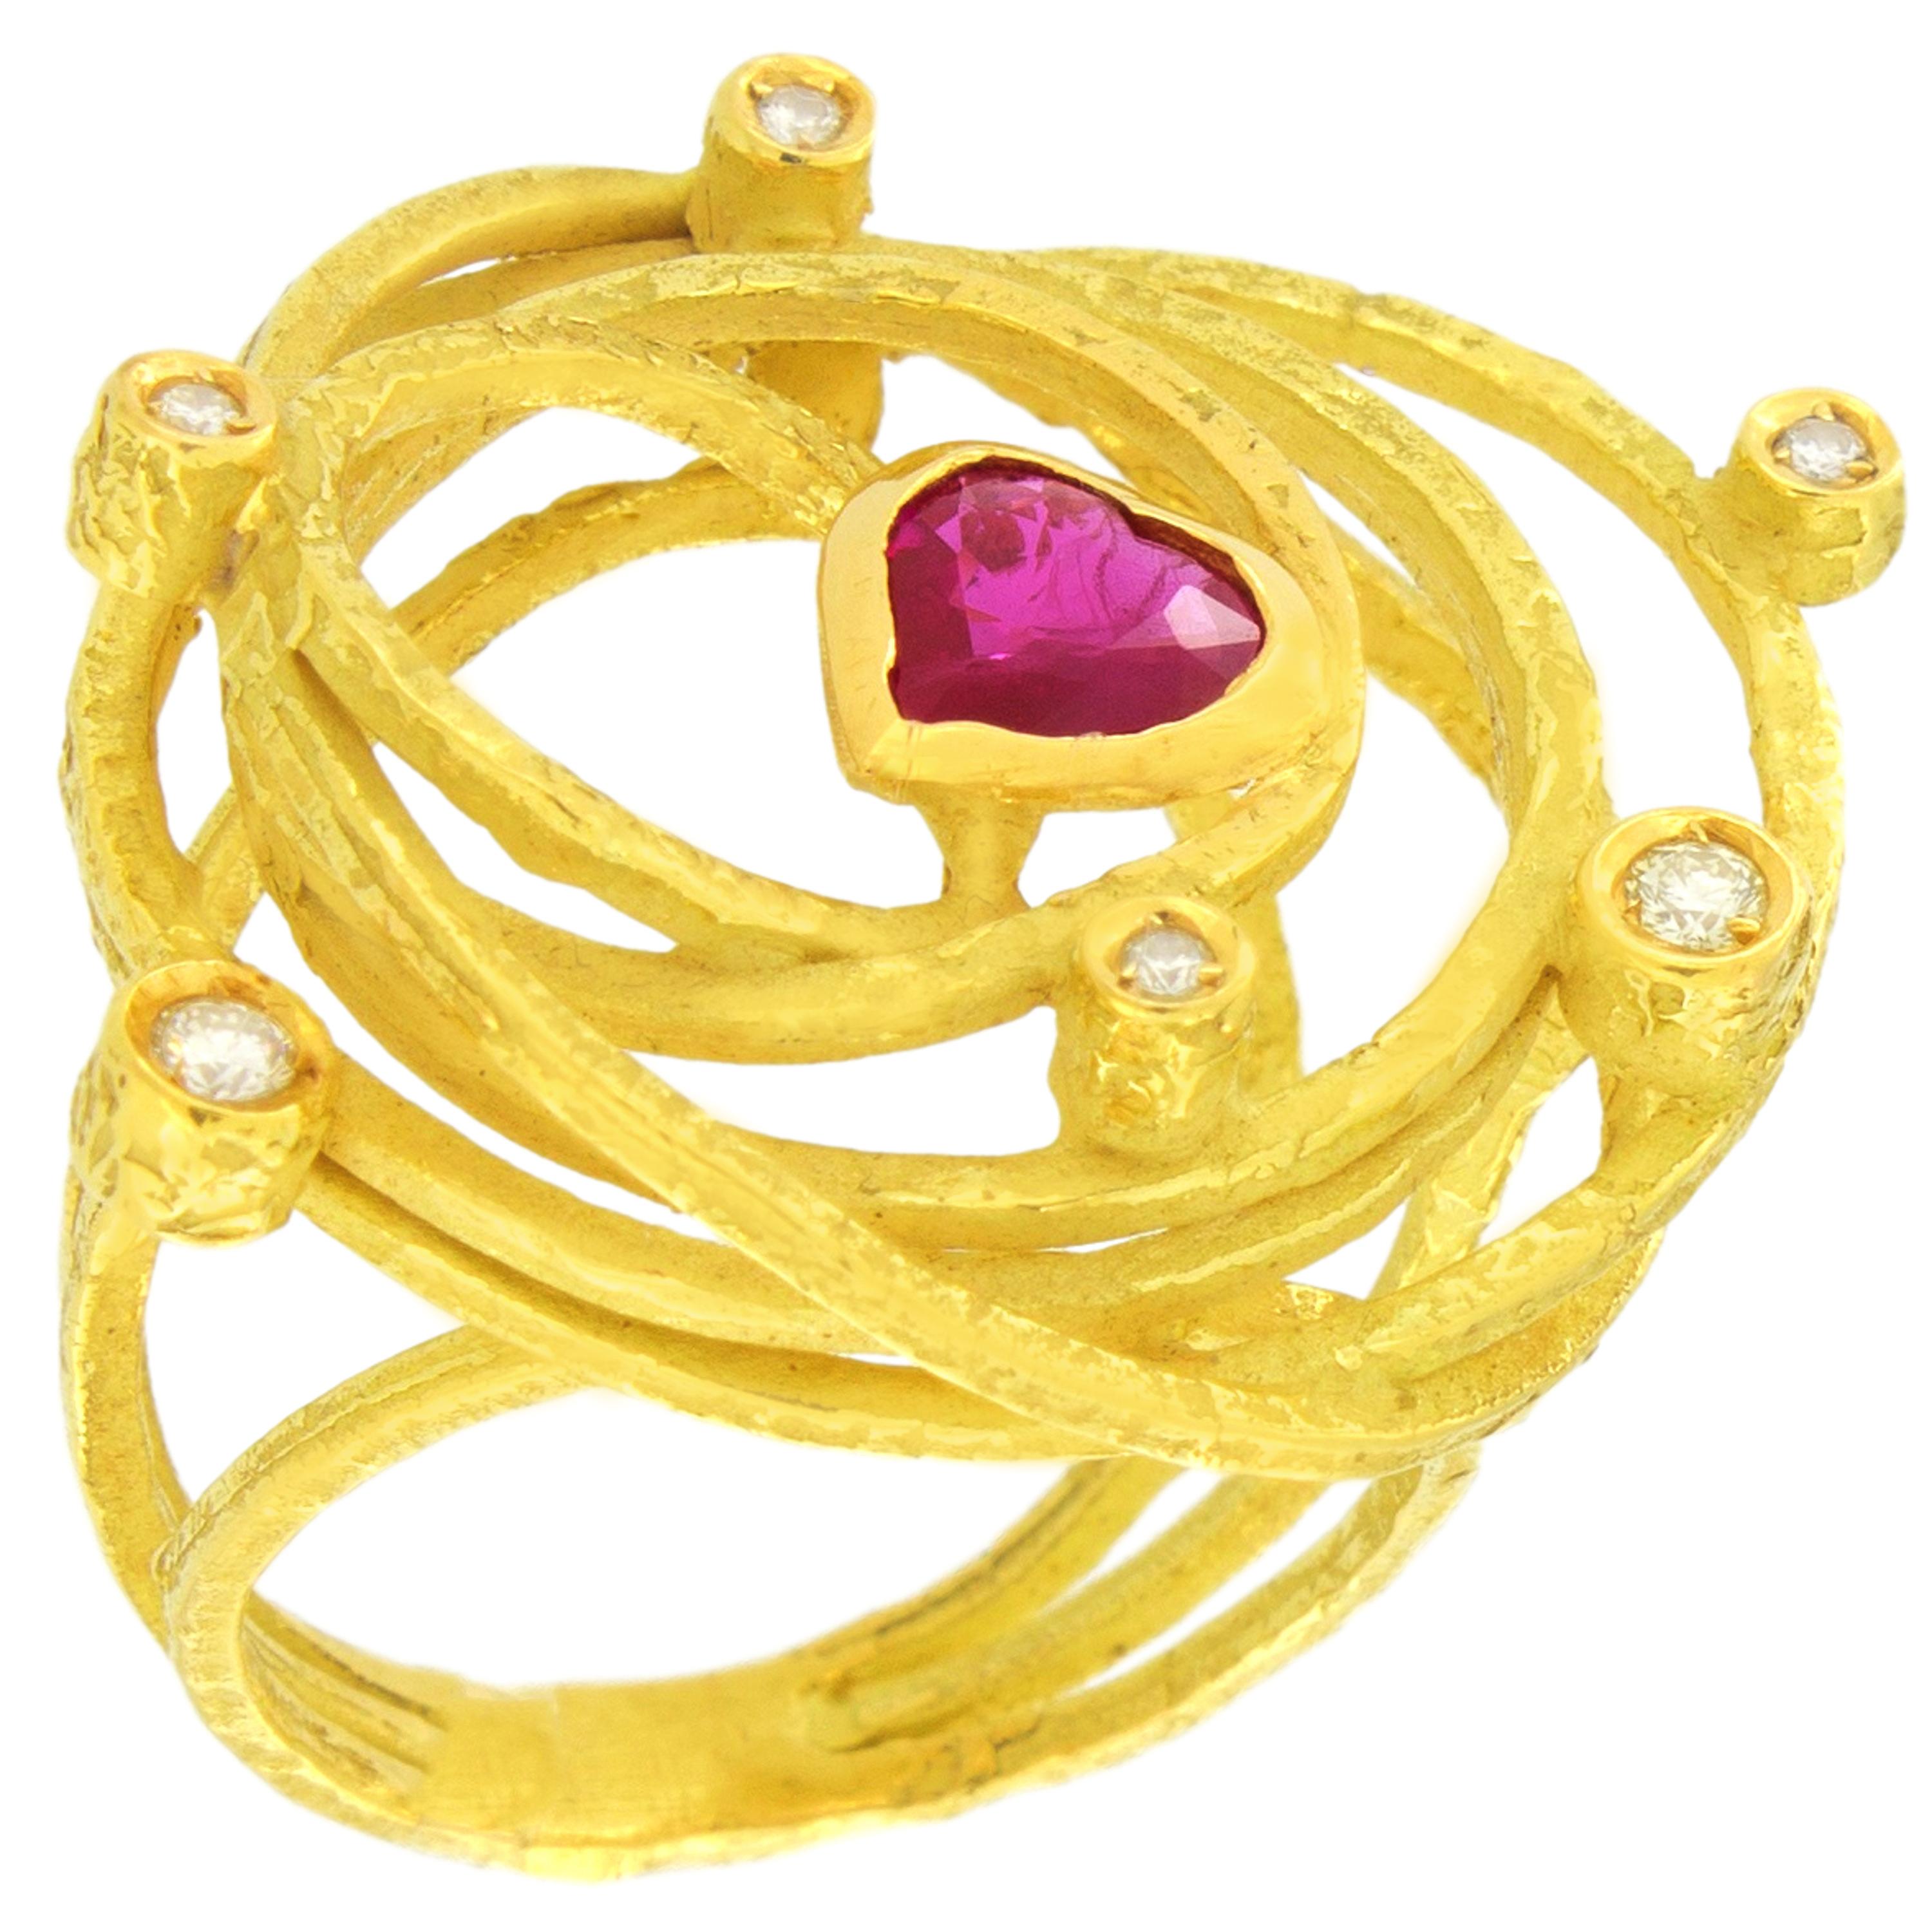 Lovely Large Heart Ruby and Diamonds Satin Yellow Gold Cocktail Ring, from Sacchi’s Universe Collection, hand-crafted with lost-wax casting technique.

Lost-wax casting, one of the oldest techniques for creating jewelry, forms the basis of Sacchi's